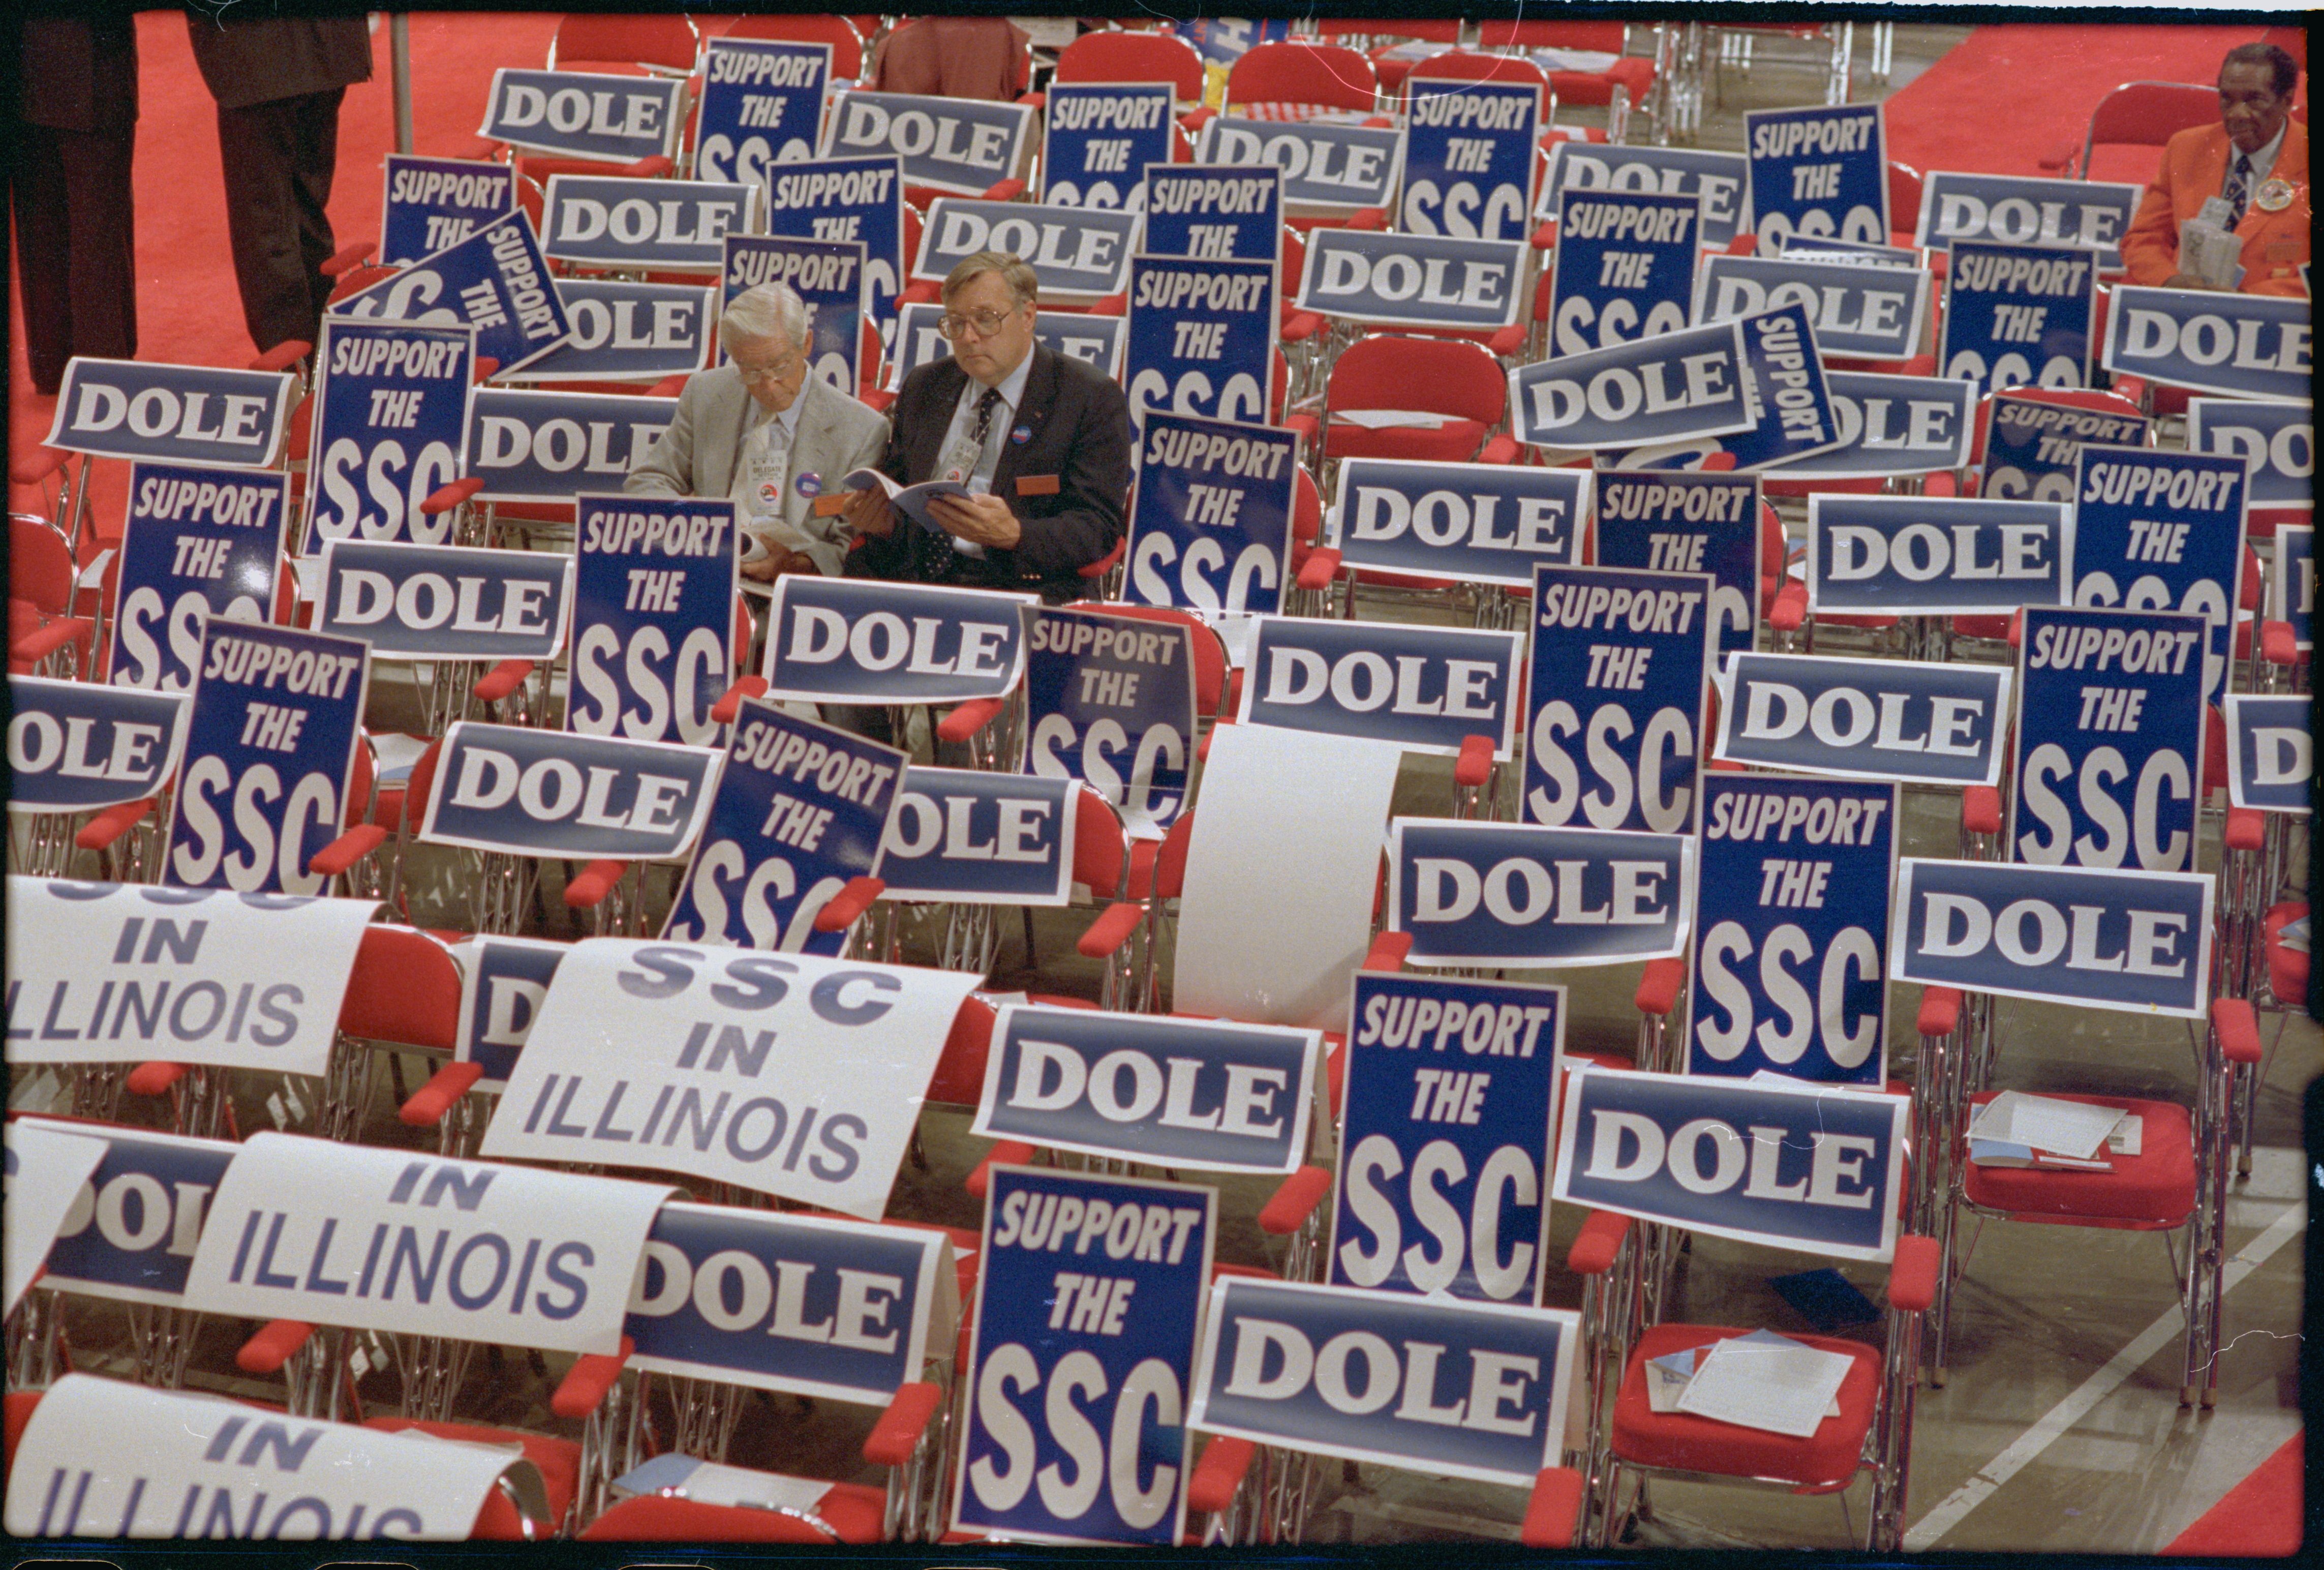 Photo shows empty seats covered in blue and white "Dole" signs